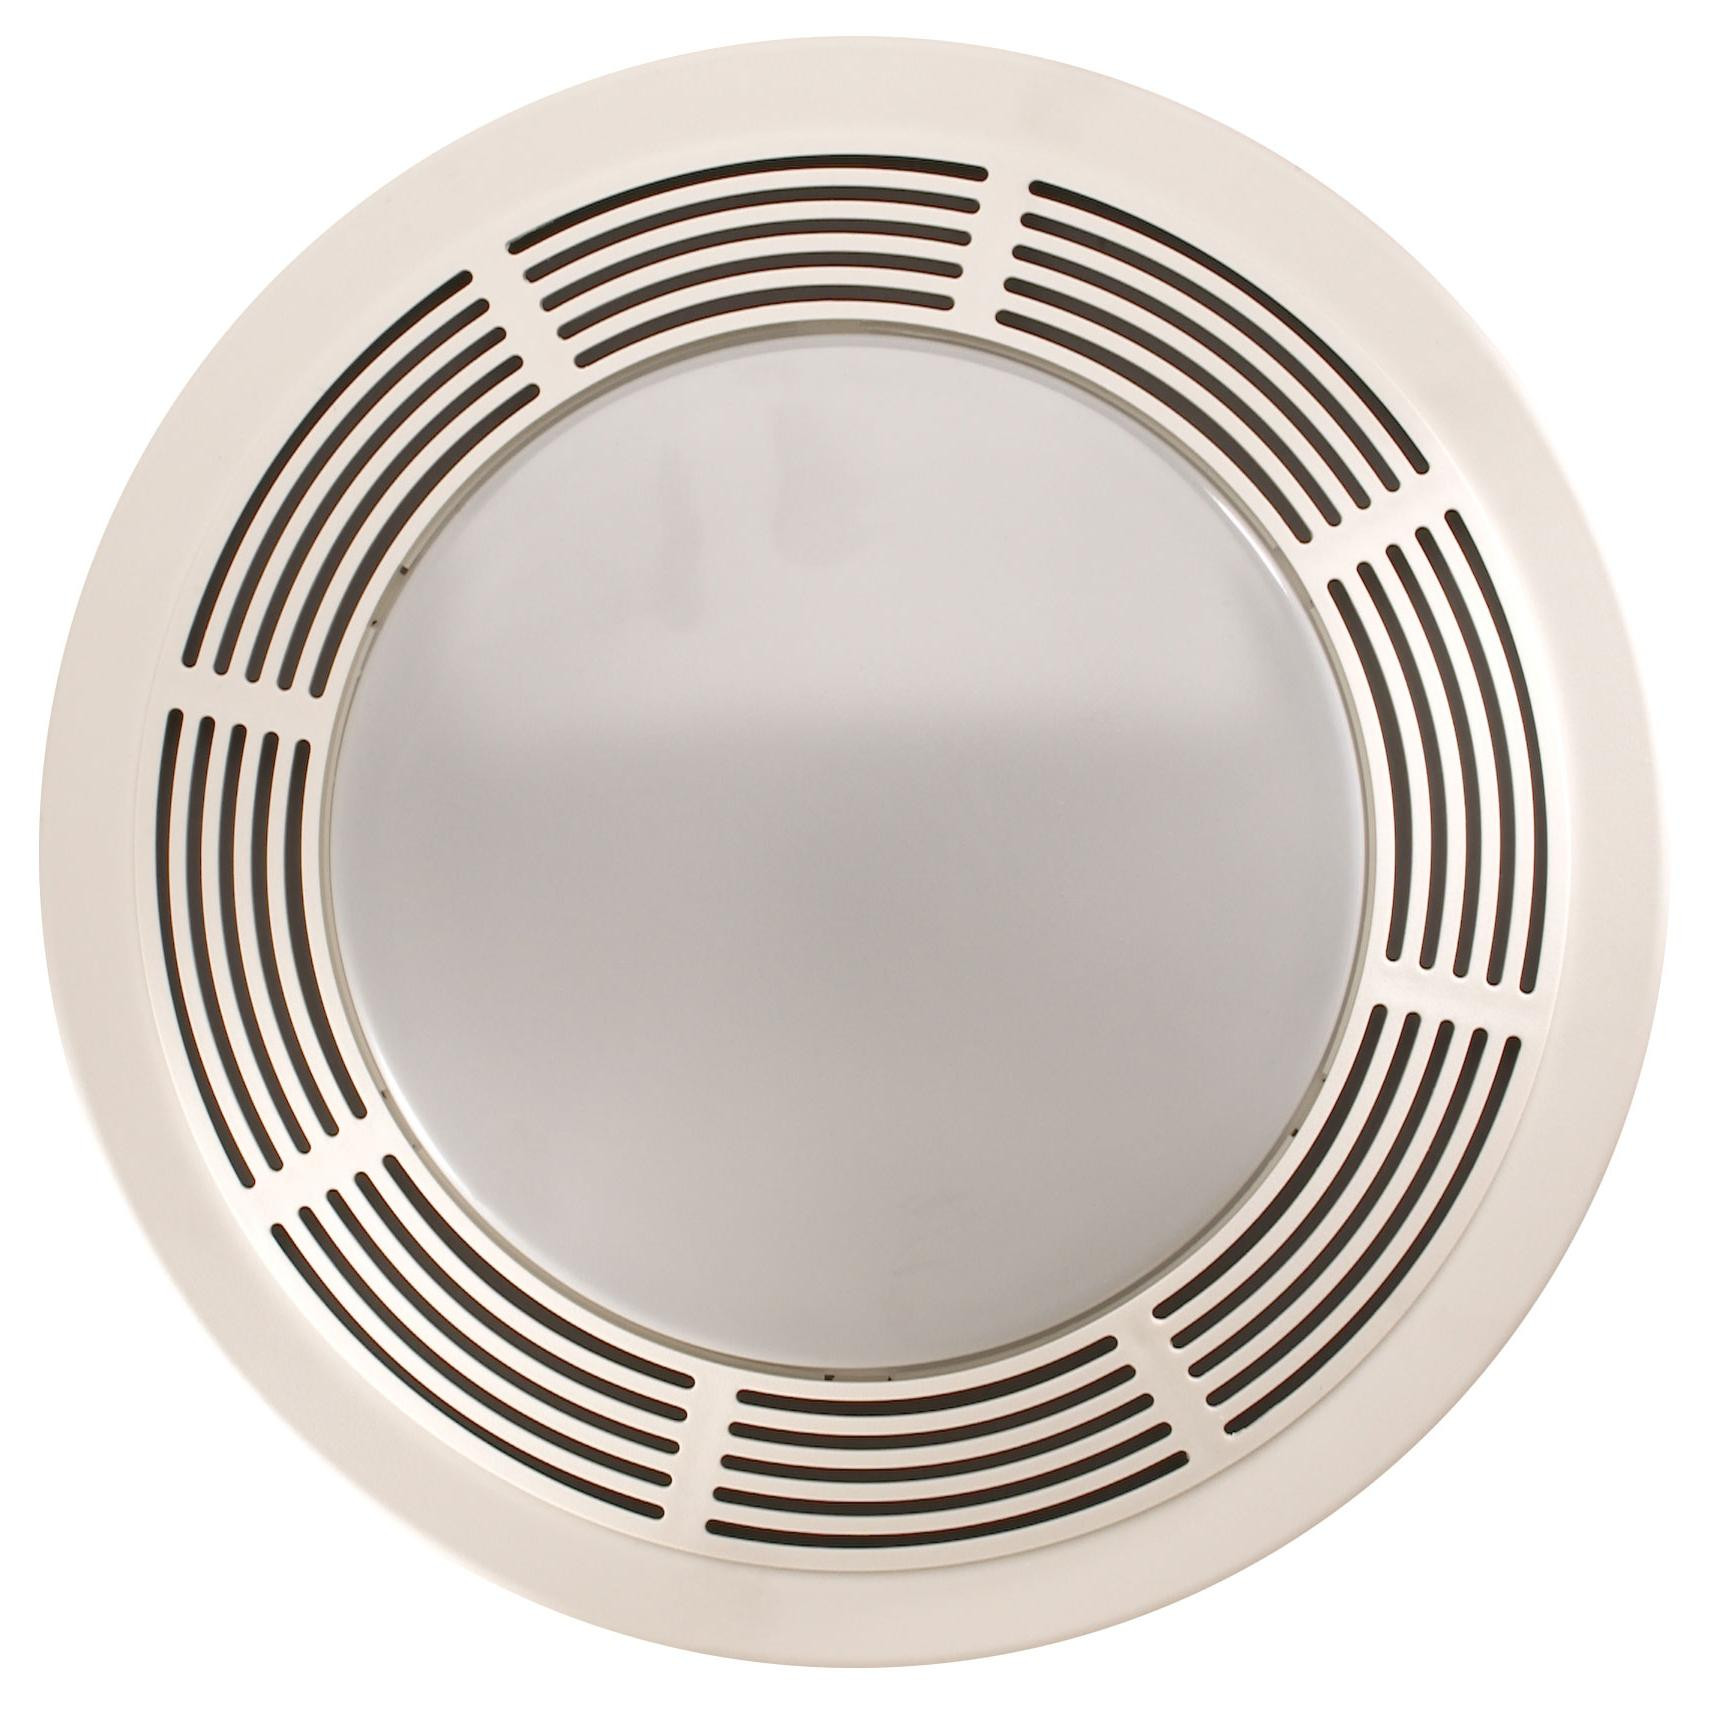 Round Bathroom Exhaust Fan
 Broan 751 Round Fan and Light bo for Bathroom and Home